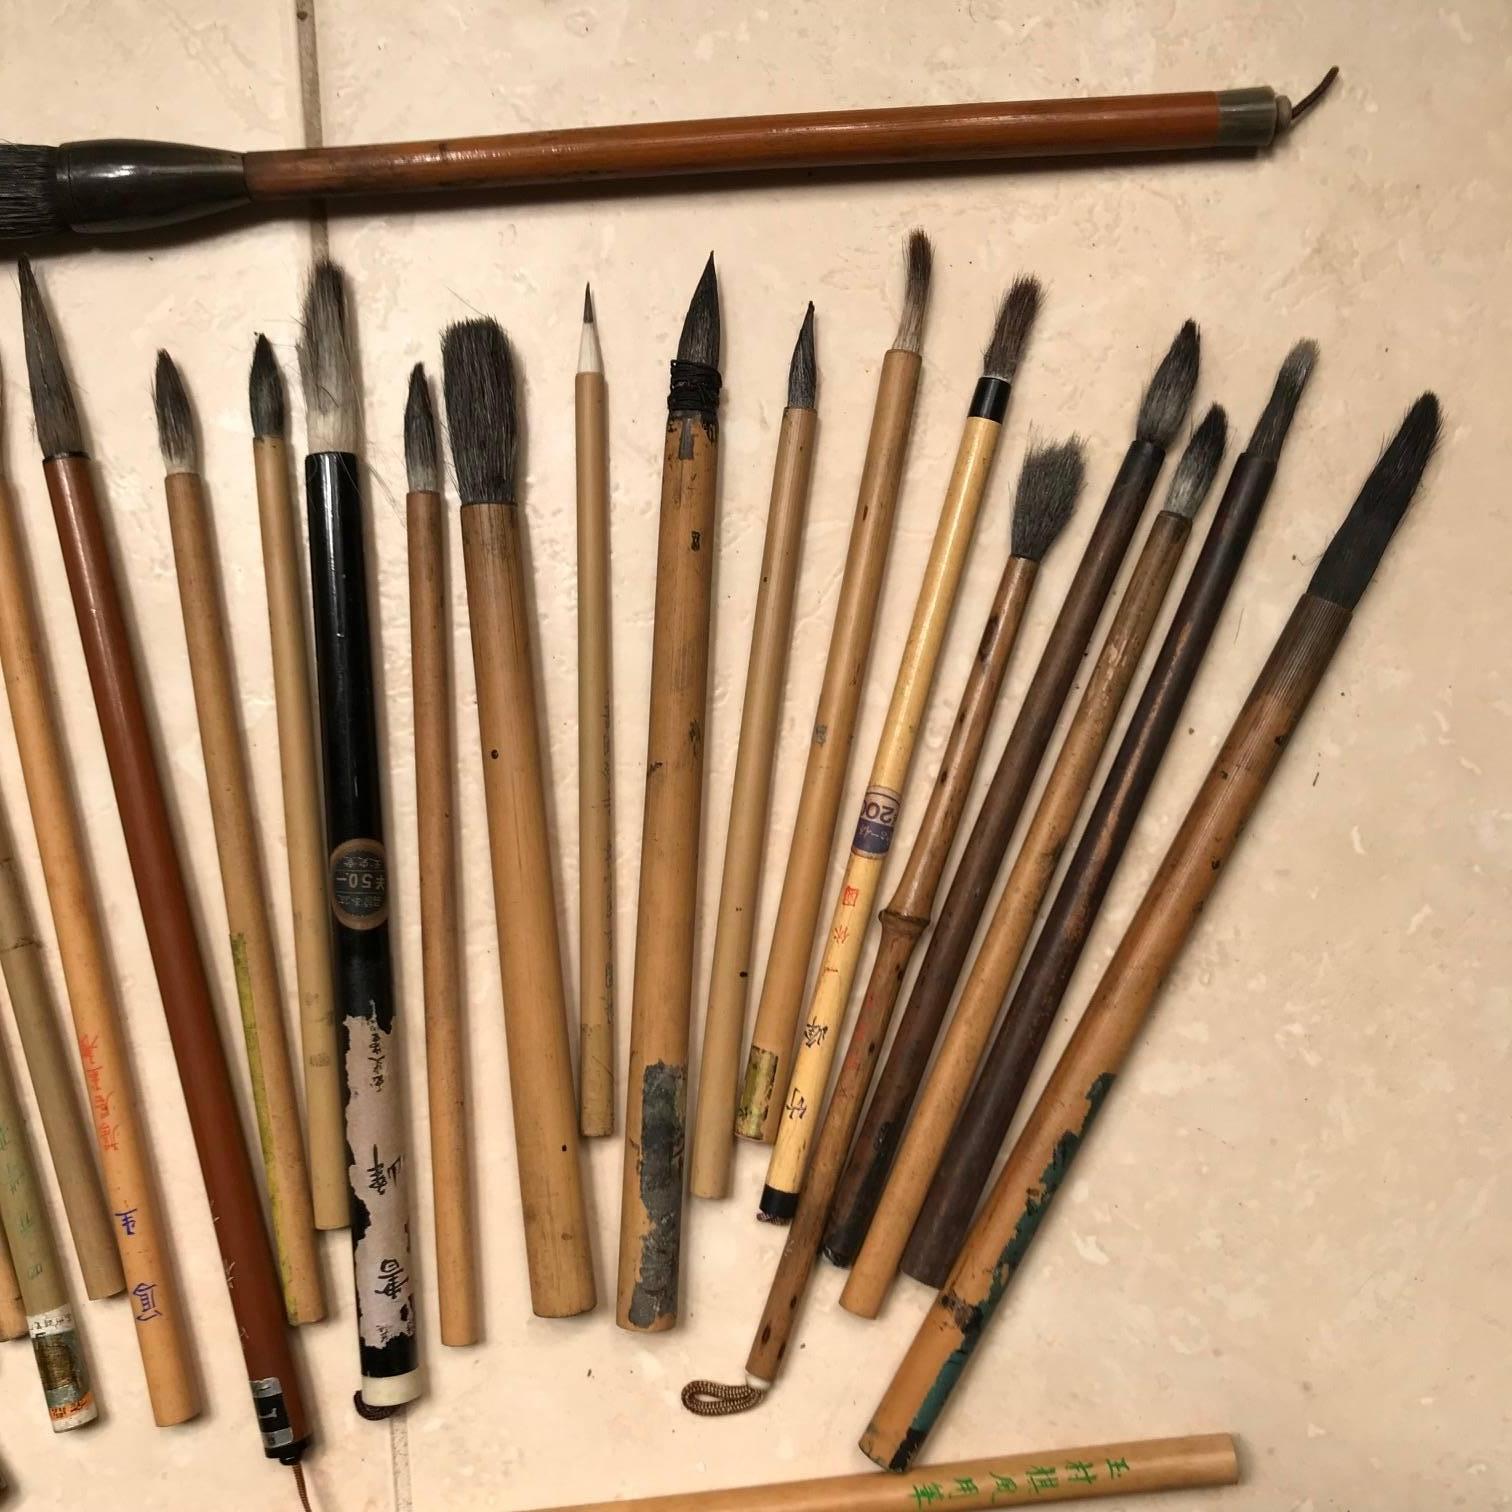 Hand-Crafted Artisan's Cache of 26 Old Chinese Paint Calligraphy Bamboo Brushes